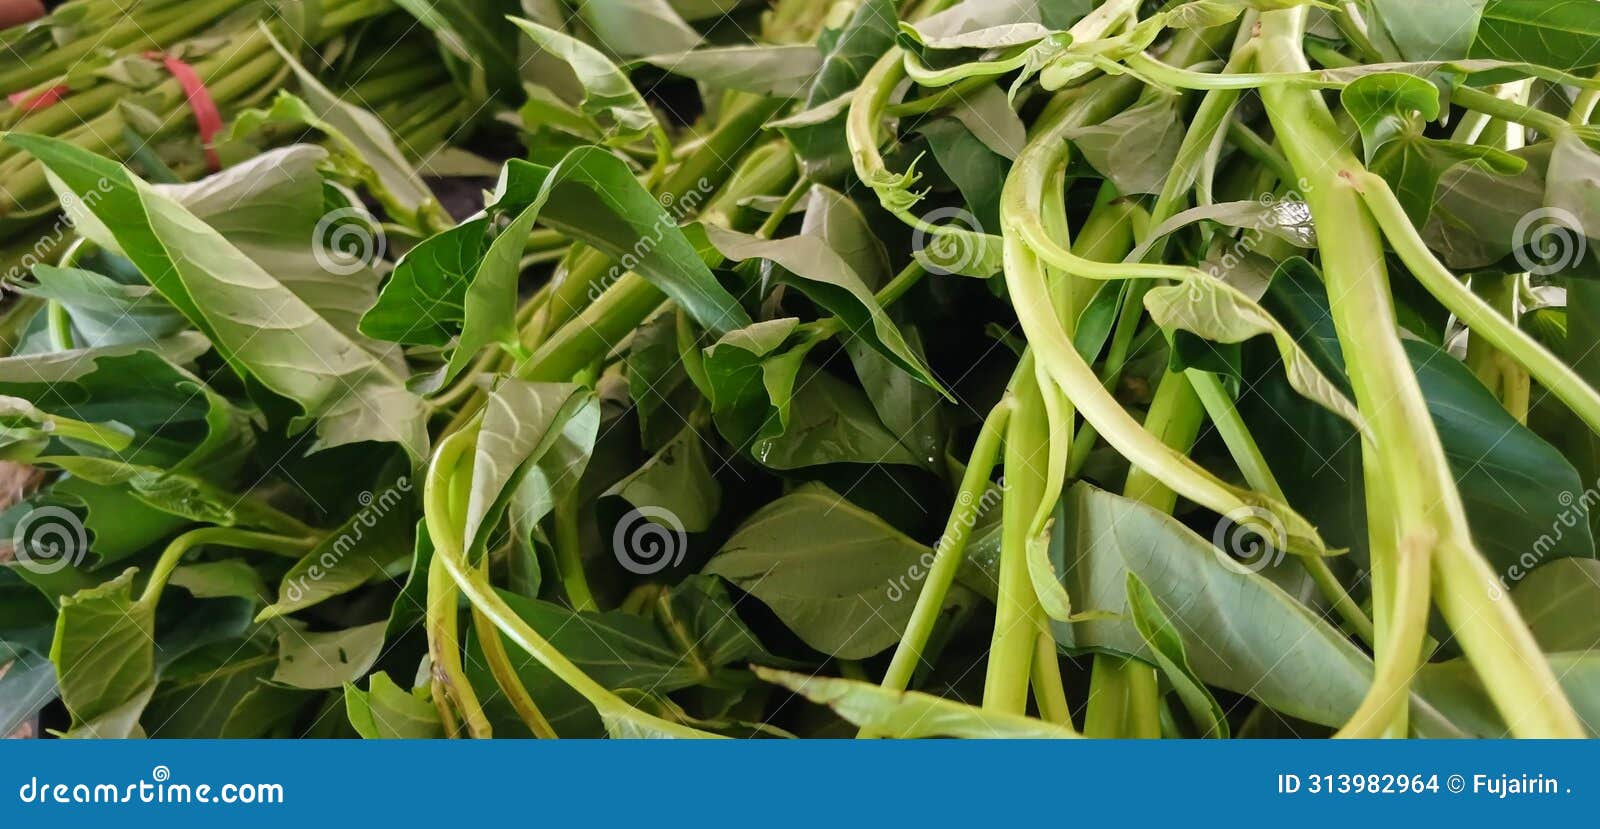 kangkung plant from traditional market